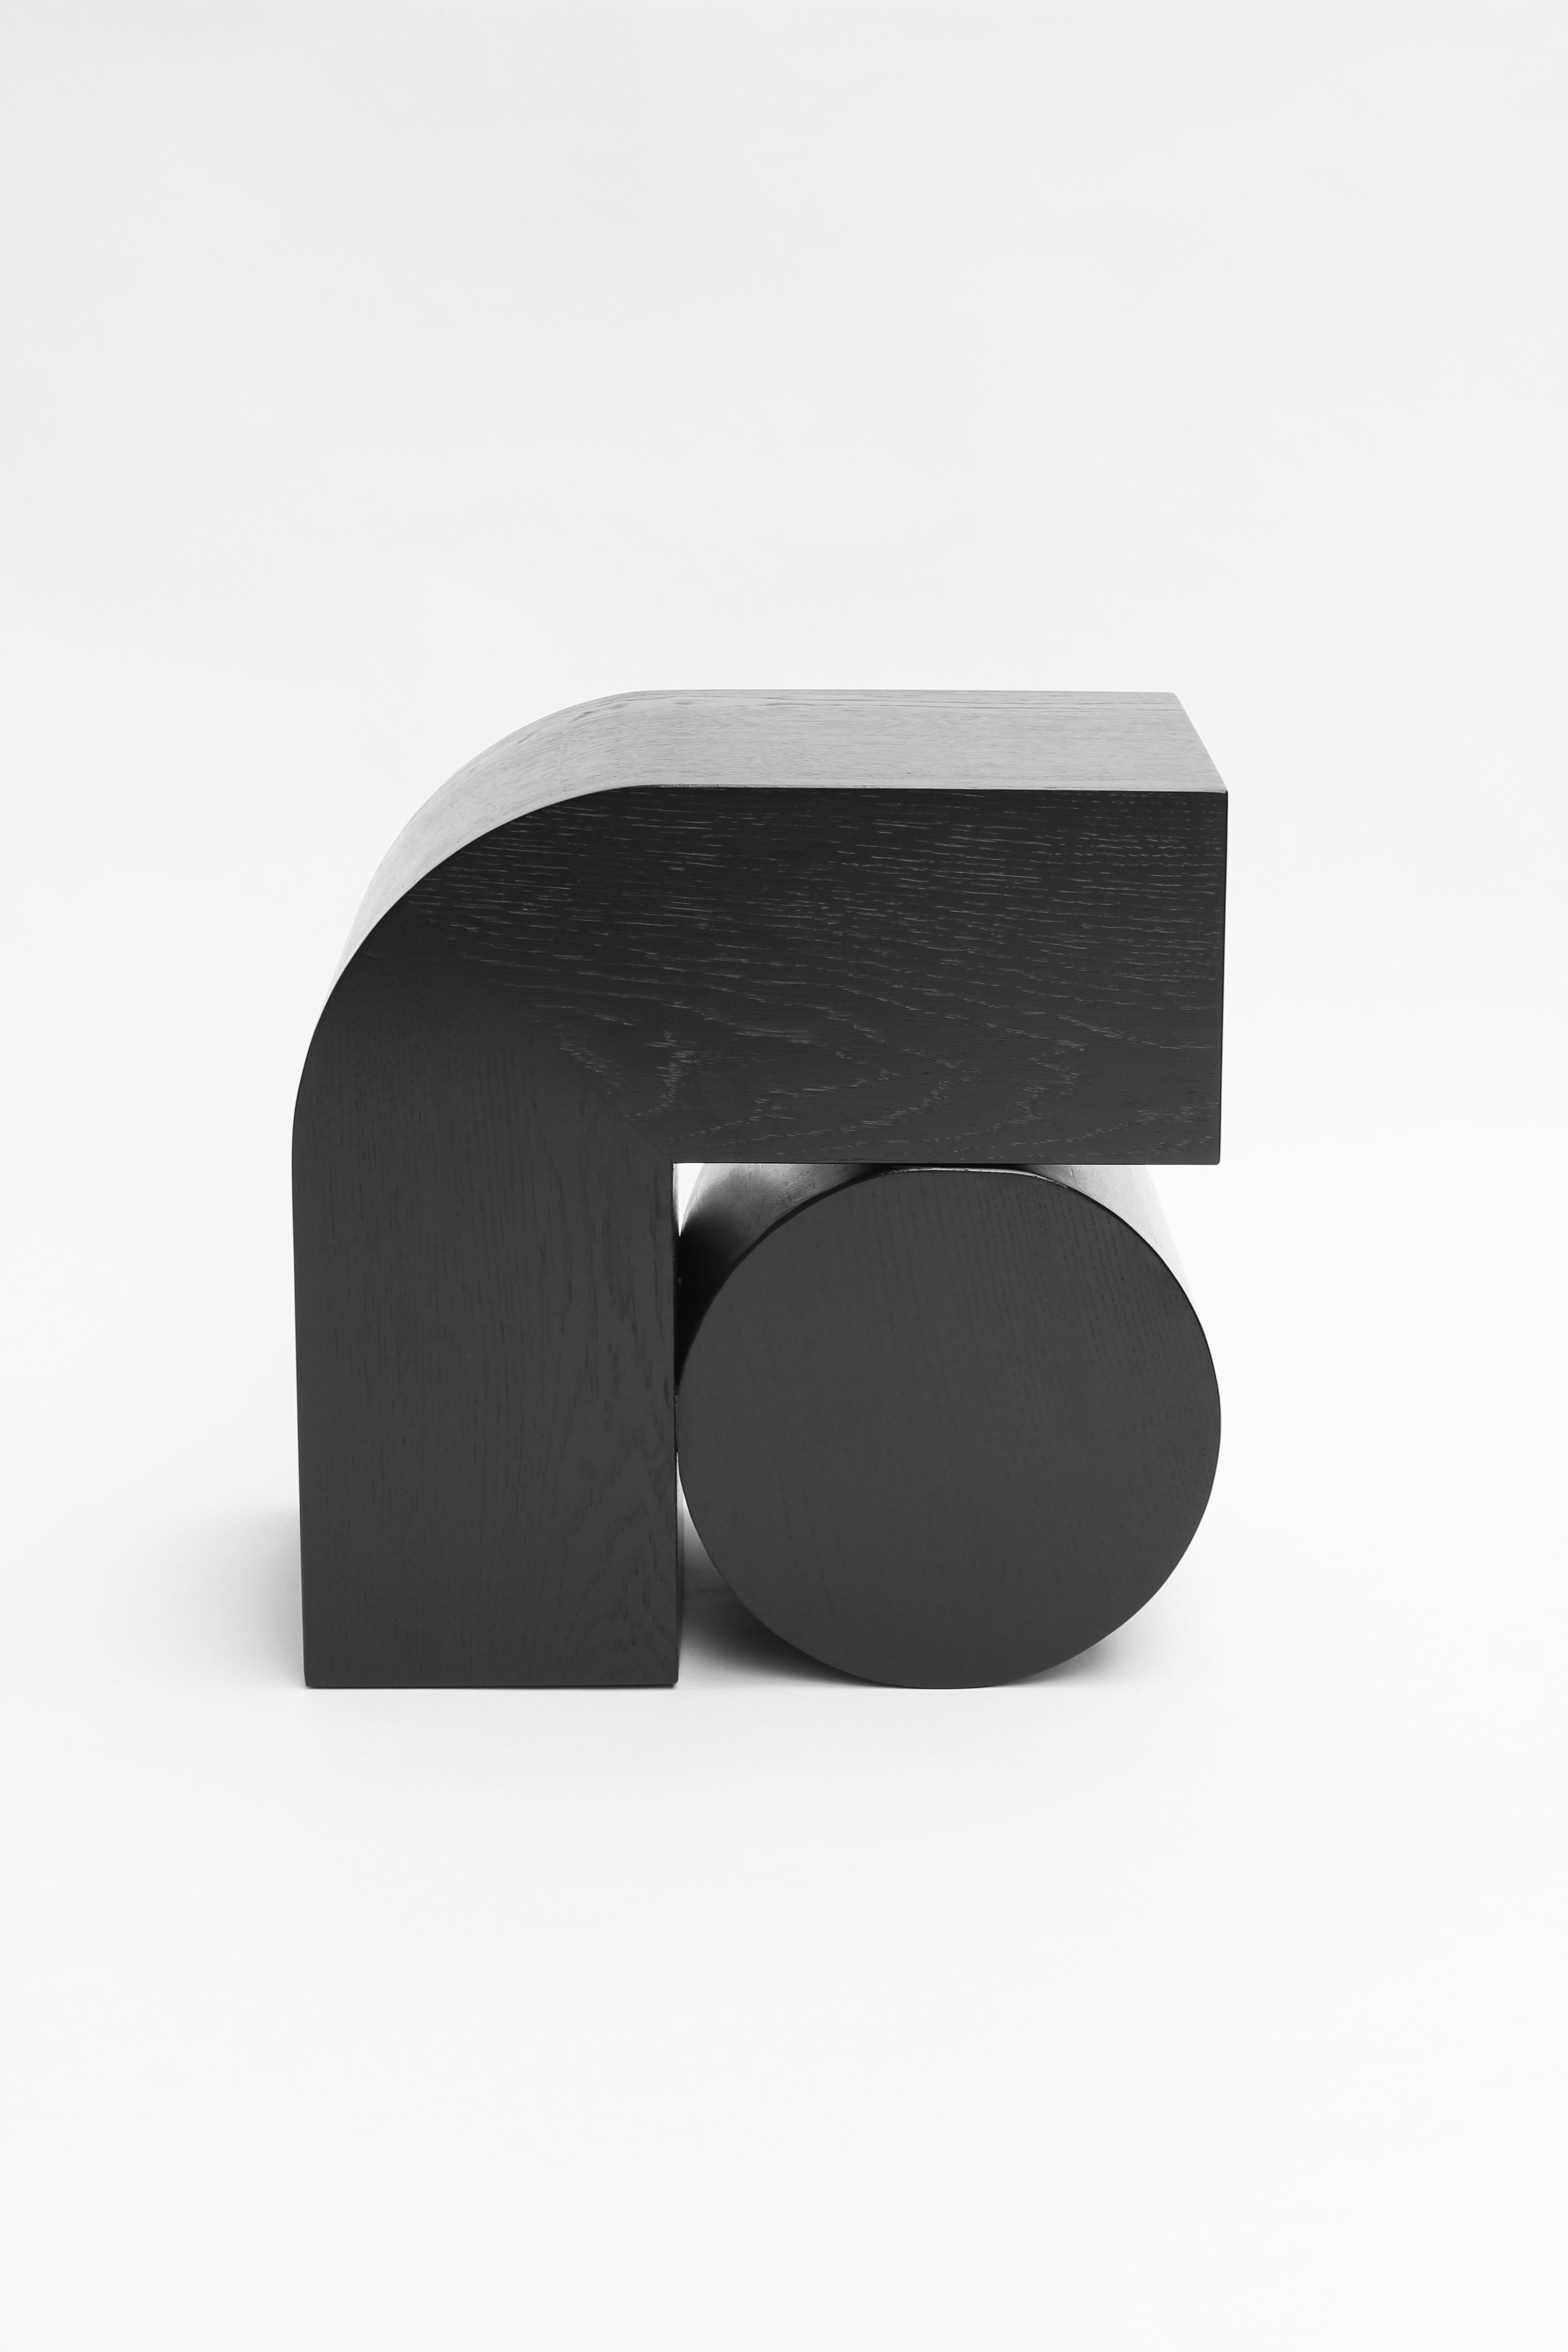 X4 is an ongoing series of simple graphic forms that create timeless and enduring designs. The handcraft wooden pieces sits somewhere between furniture, object and sculpture. The designs start as a 2D composition that we translate to a 3D object.